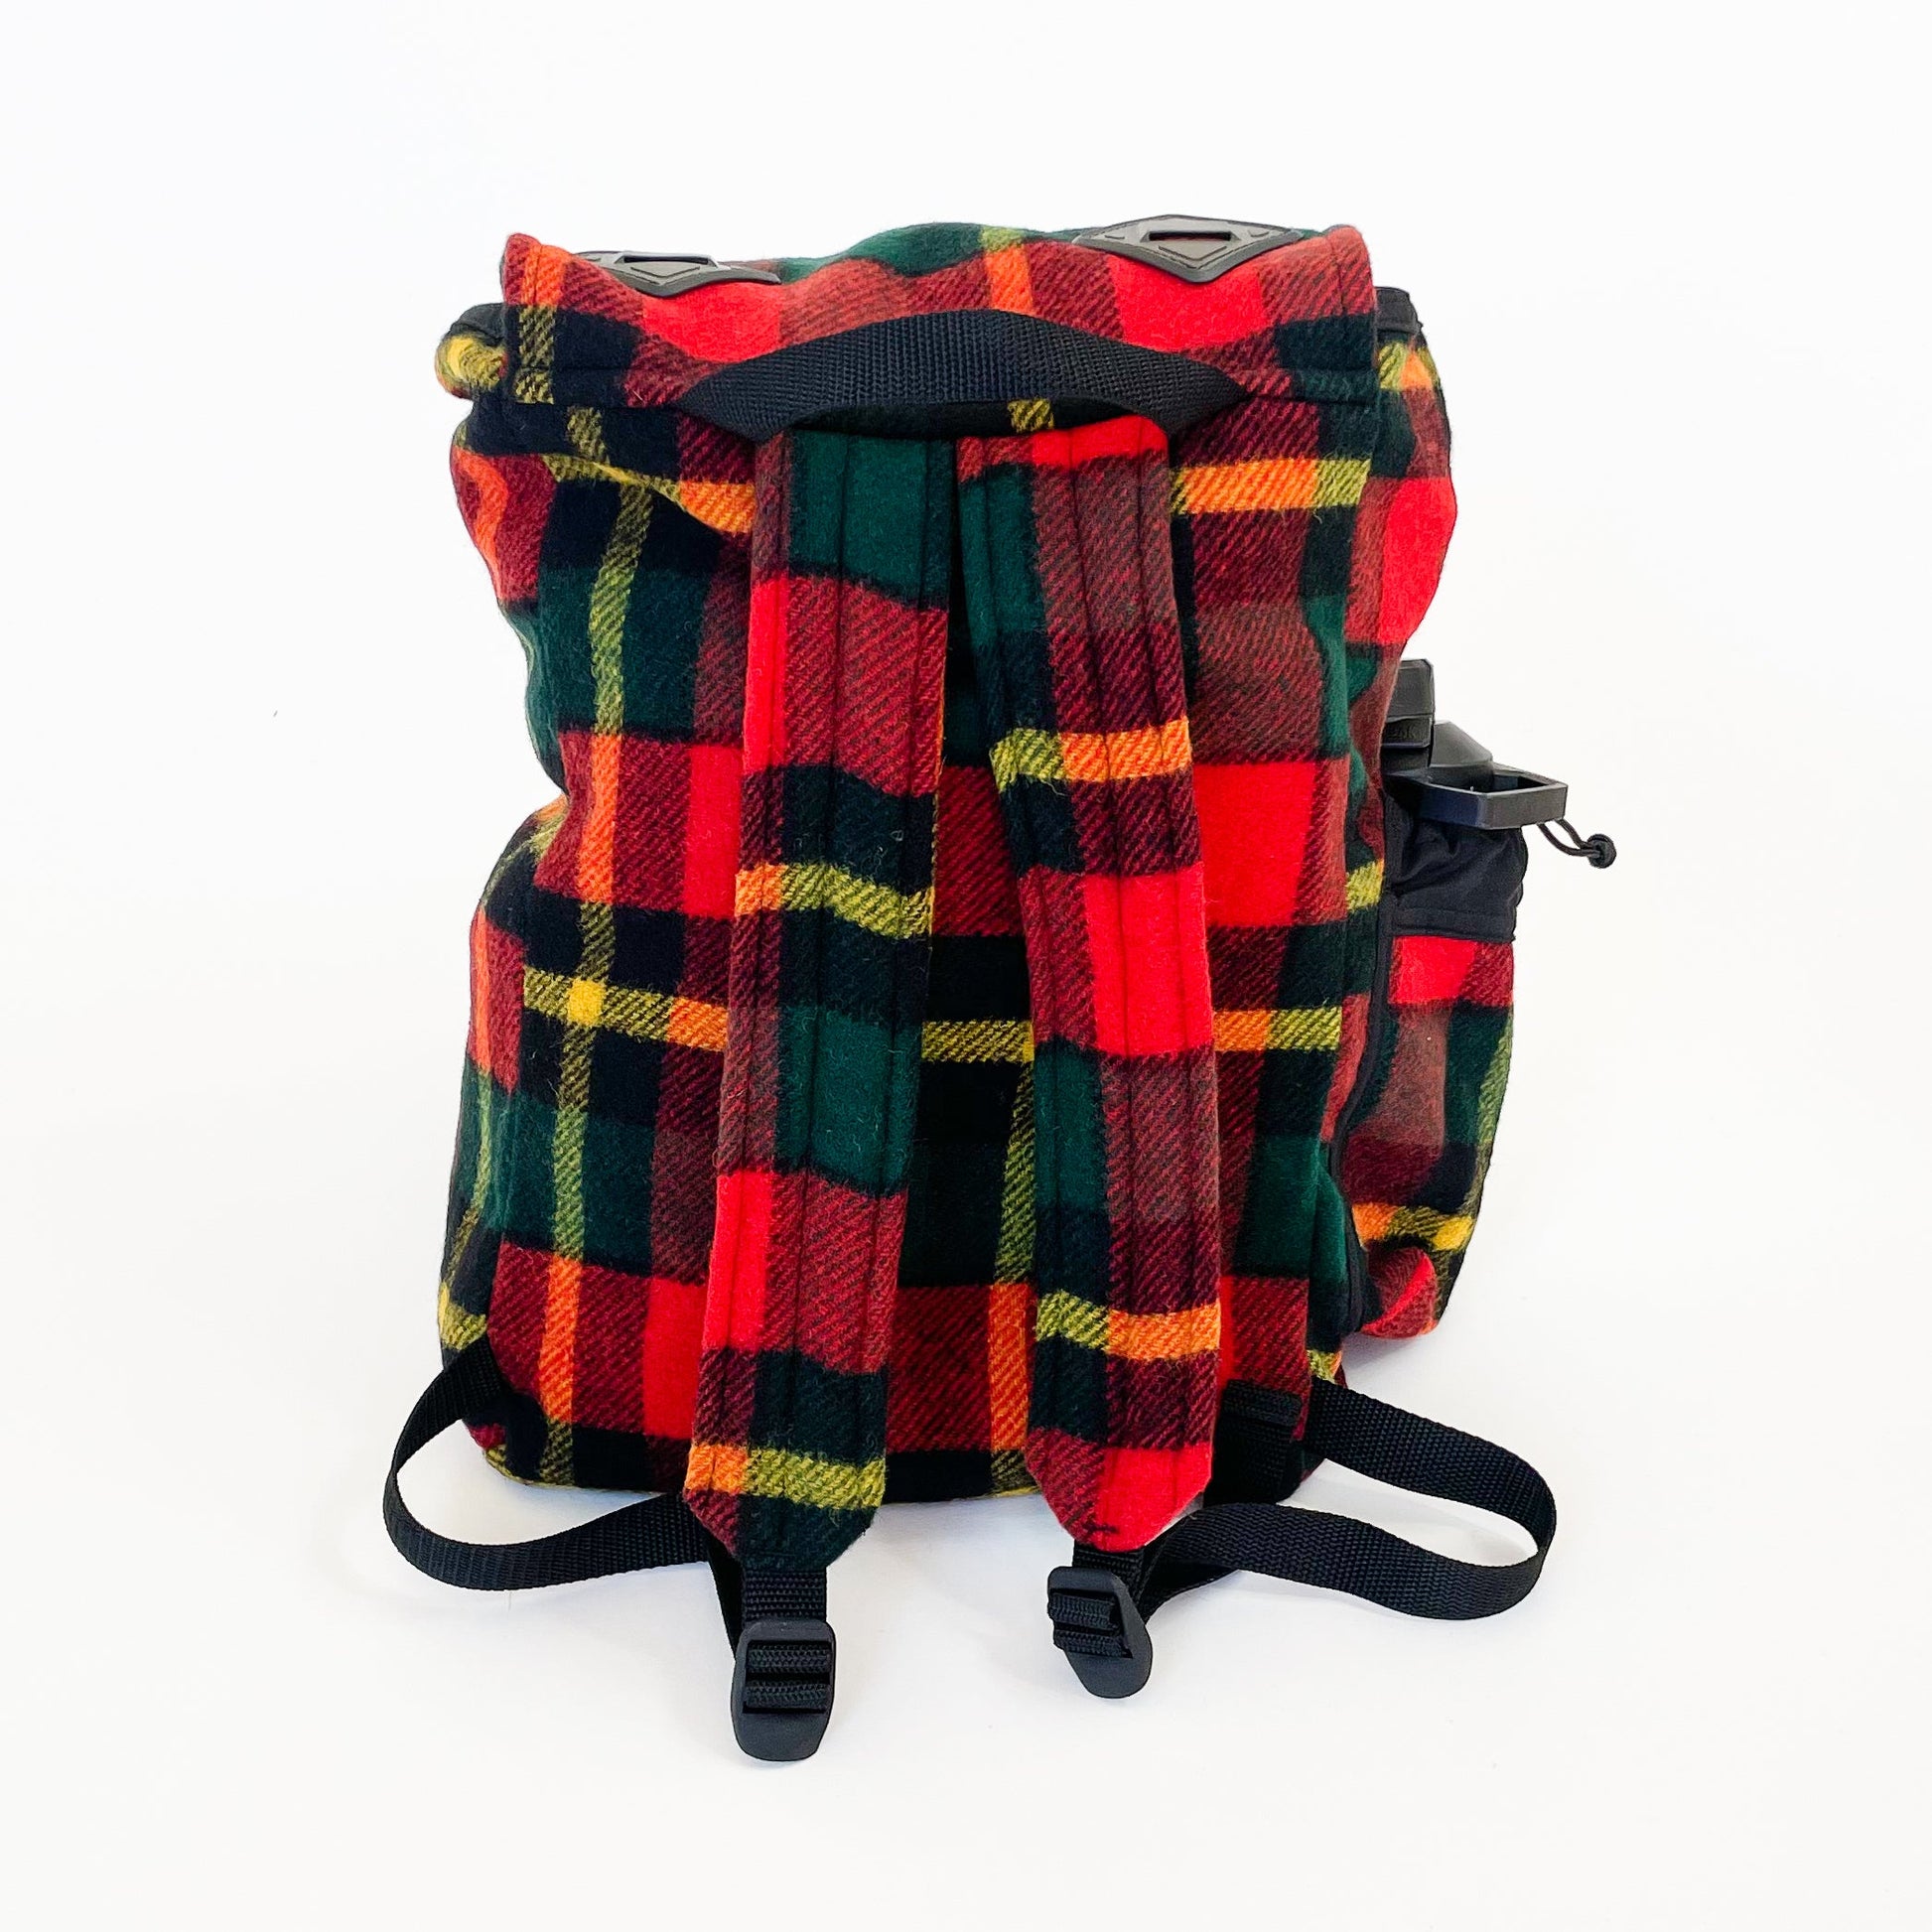 Johnson Woolen Mills Daypack Bright Red/Green/Yellow back view with water bottle in side pocket